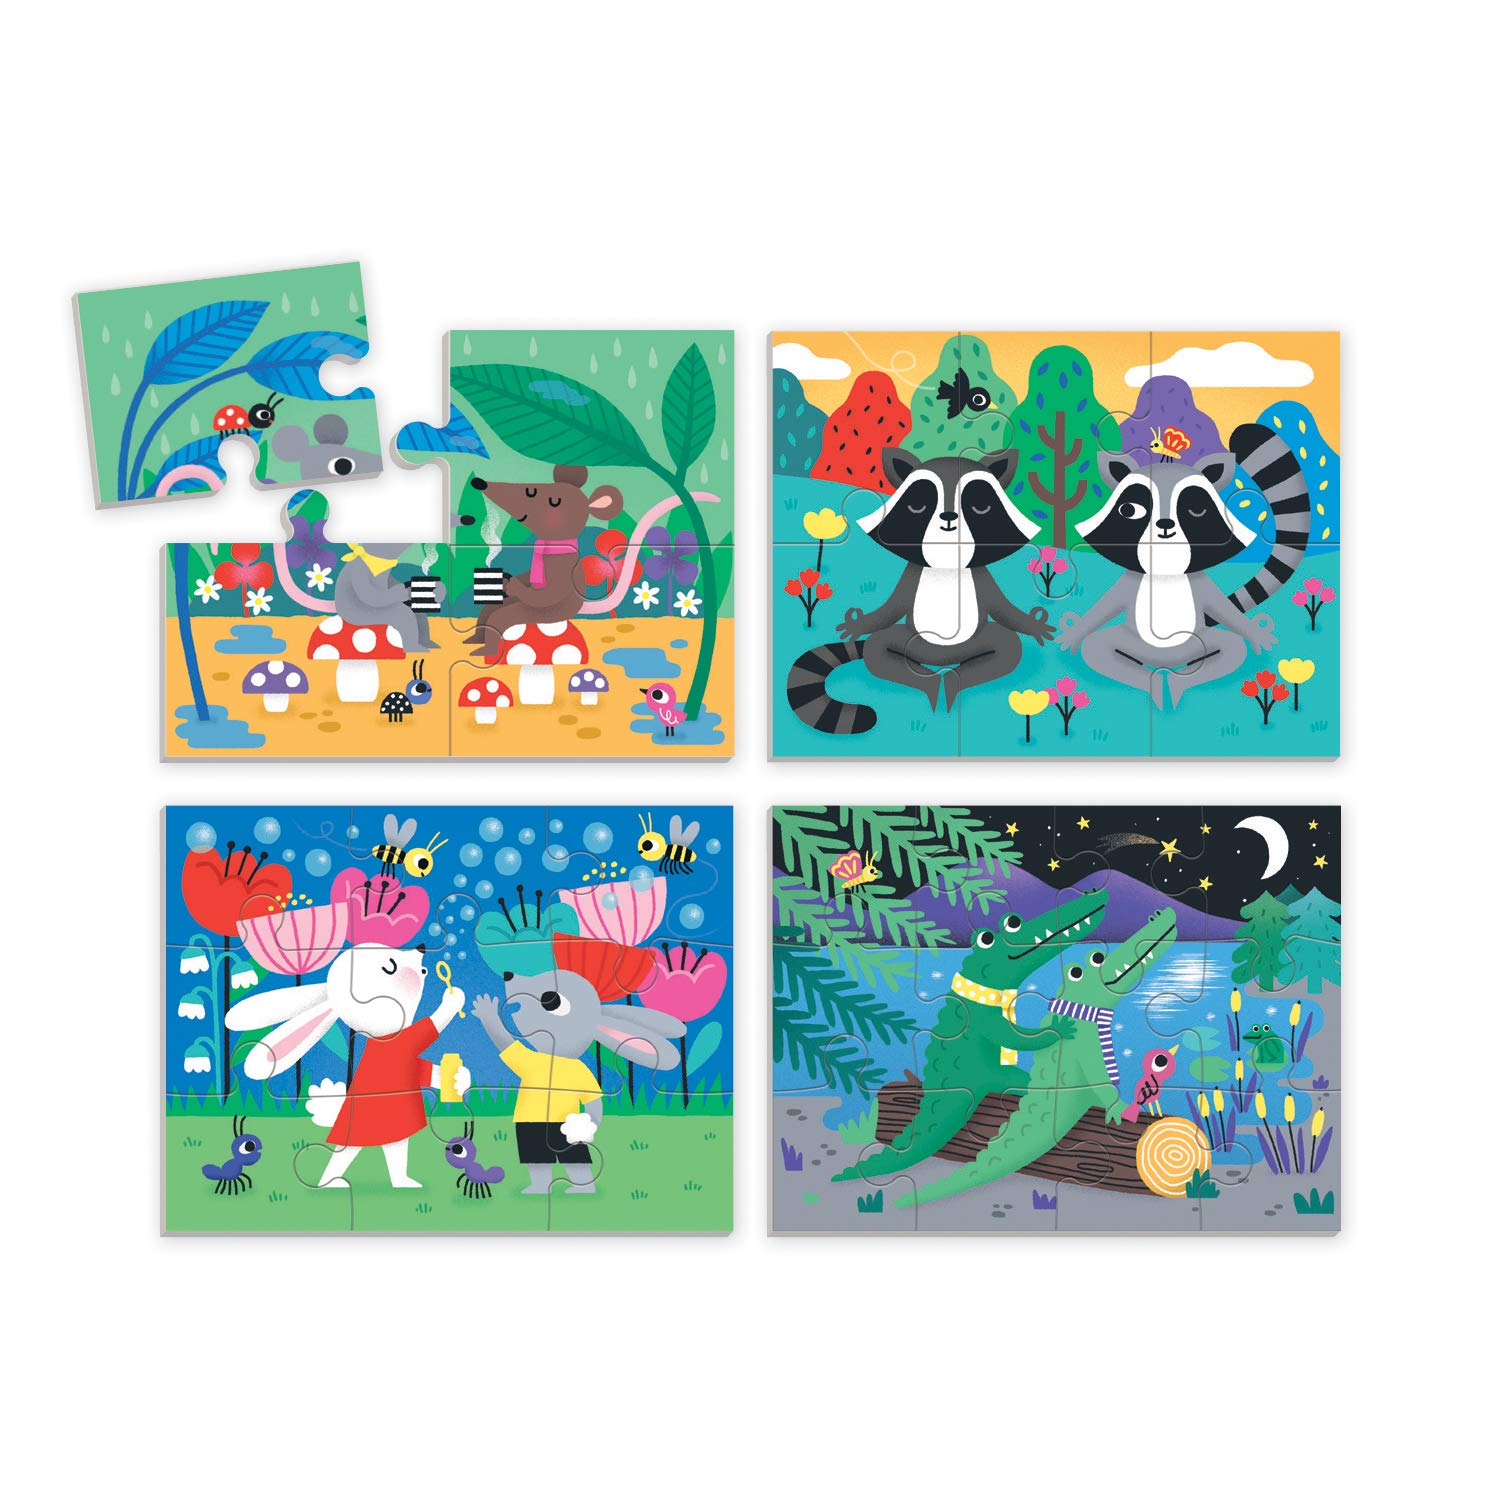 Mudpuppy Mindfulness 4-in-a-Box Puzzle Set – Includes 4 Progressive Jigsaw Puzzles for Kids with 4-12 Pieces – Features Colorful Animal Illustrations, for Ages 2-5 – Each Puzzle Measures 6” x 8”